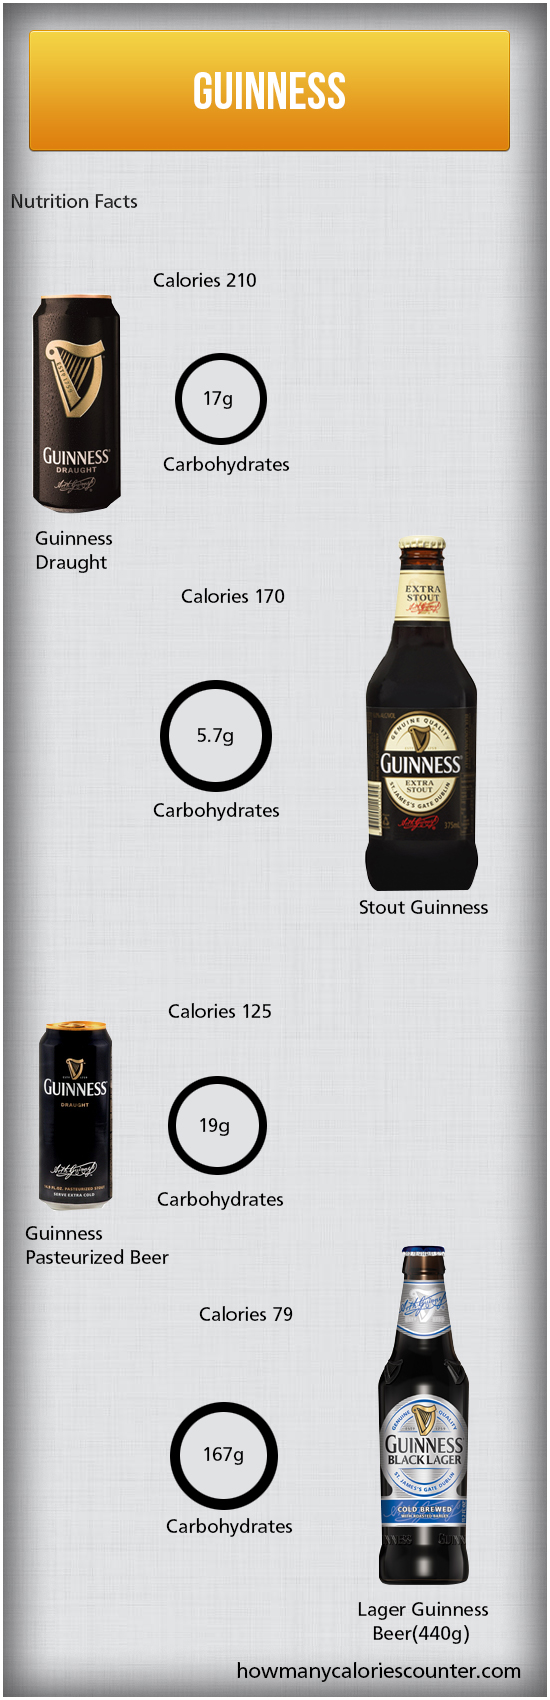 Calories in Guinness